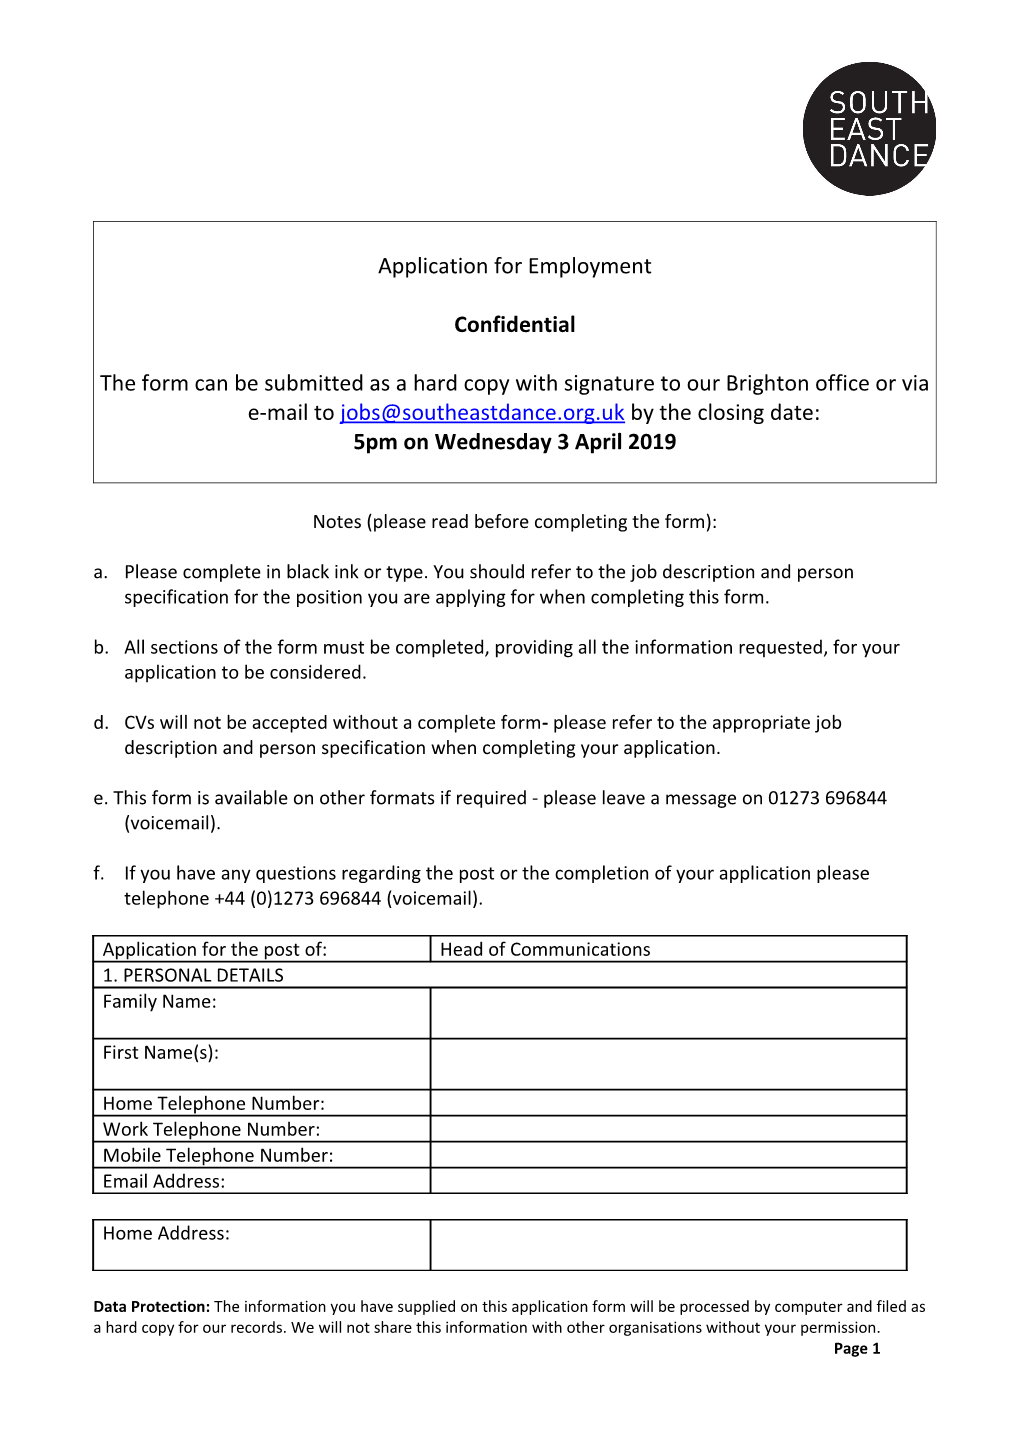 The Form Can Be Submitted As Ahard Copywith Signature to Our Brighton Office Or Via